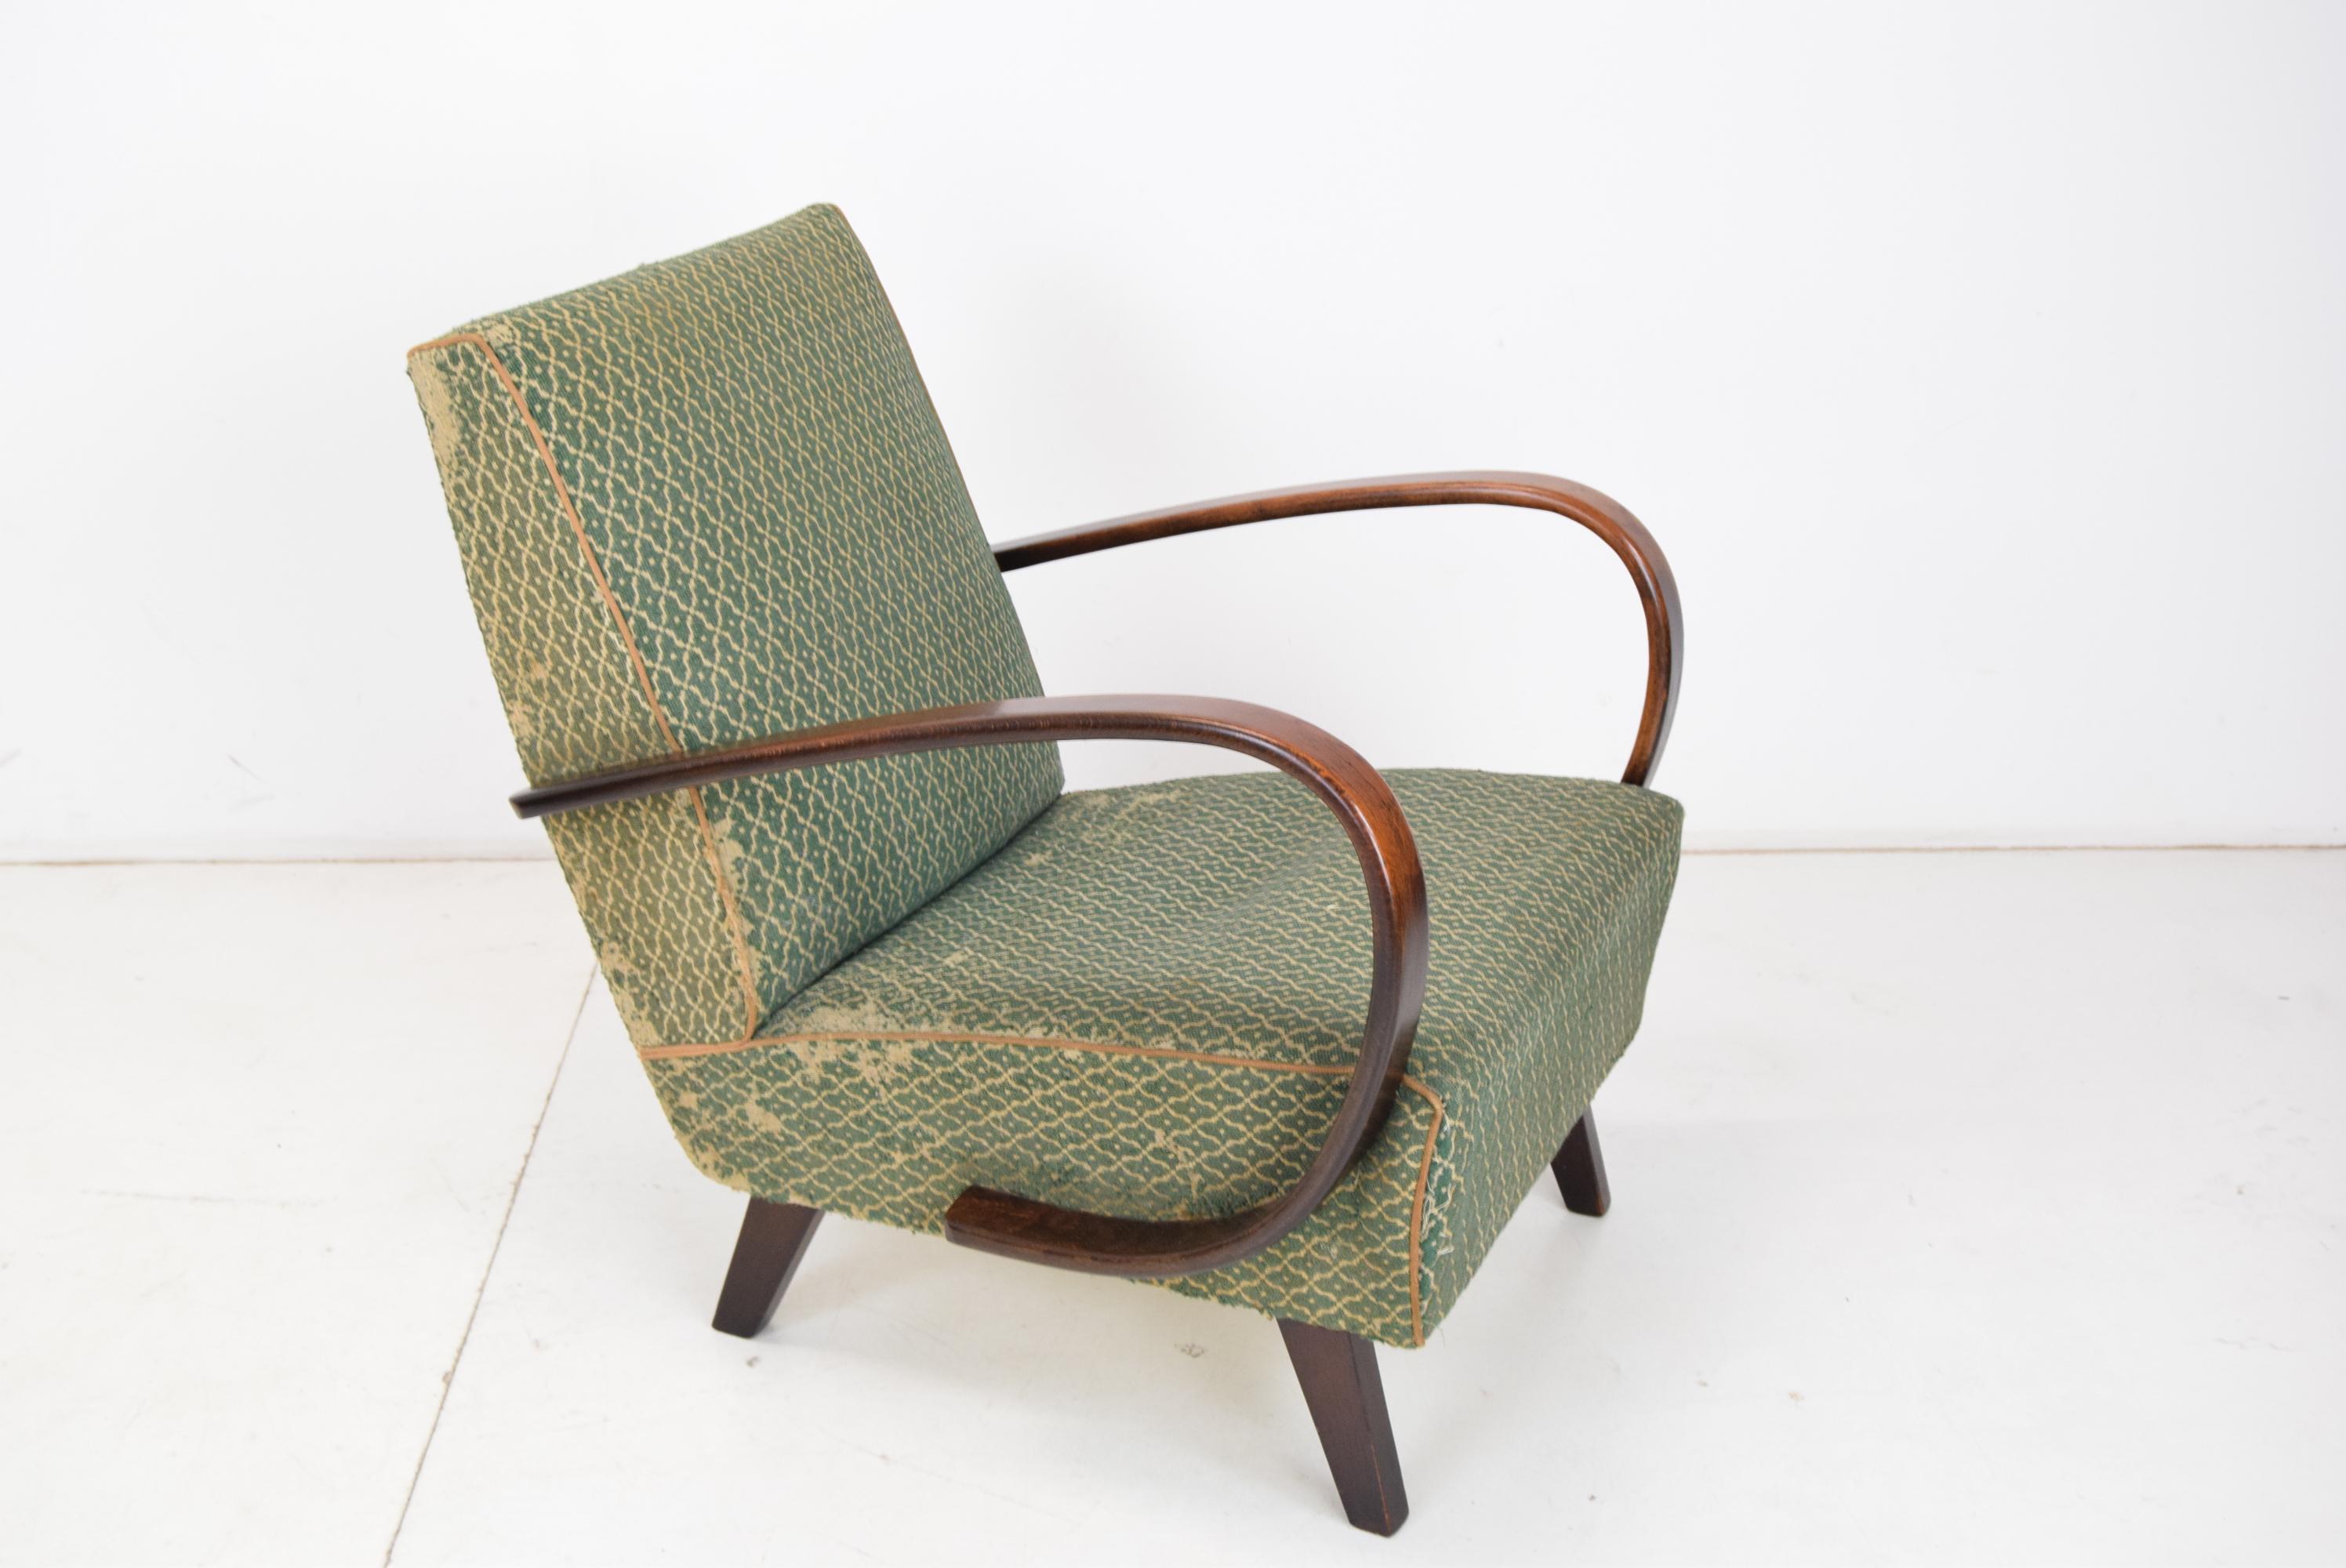 Made in Czechoslovakia
 Made of Wood,Fabric 
The chair is suitable for reupholstery
The wood is good condition
Original condition.